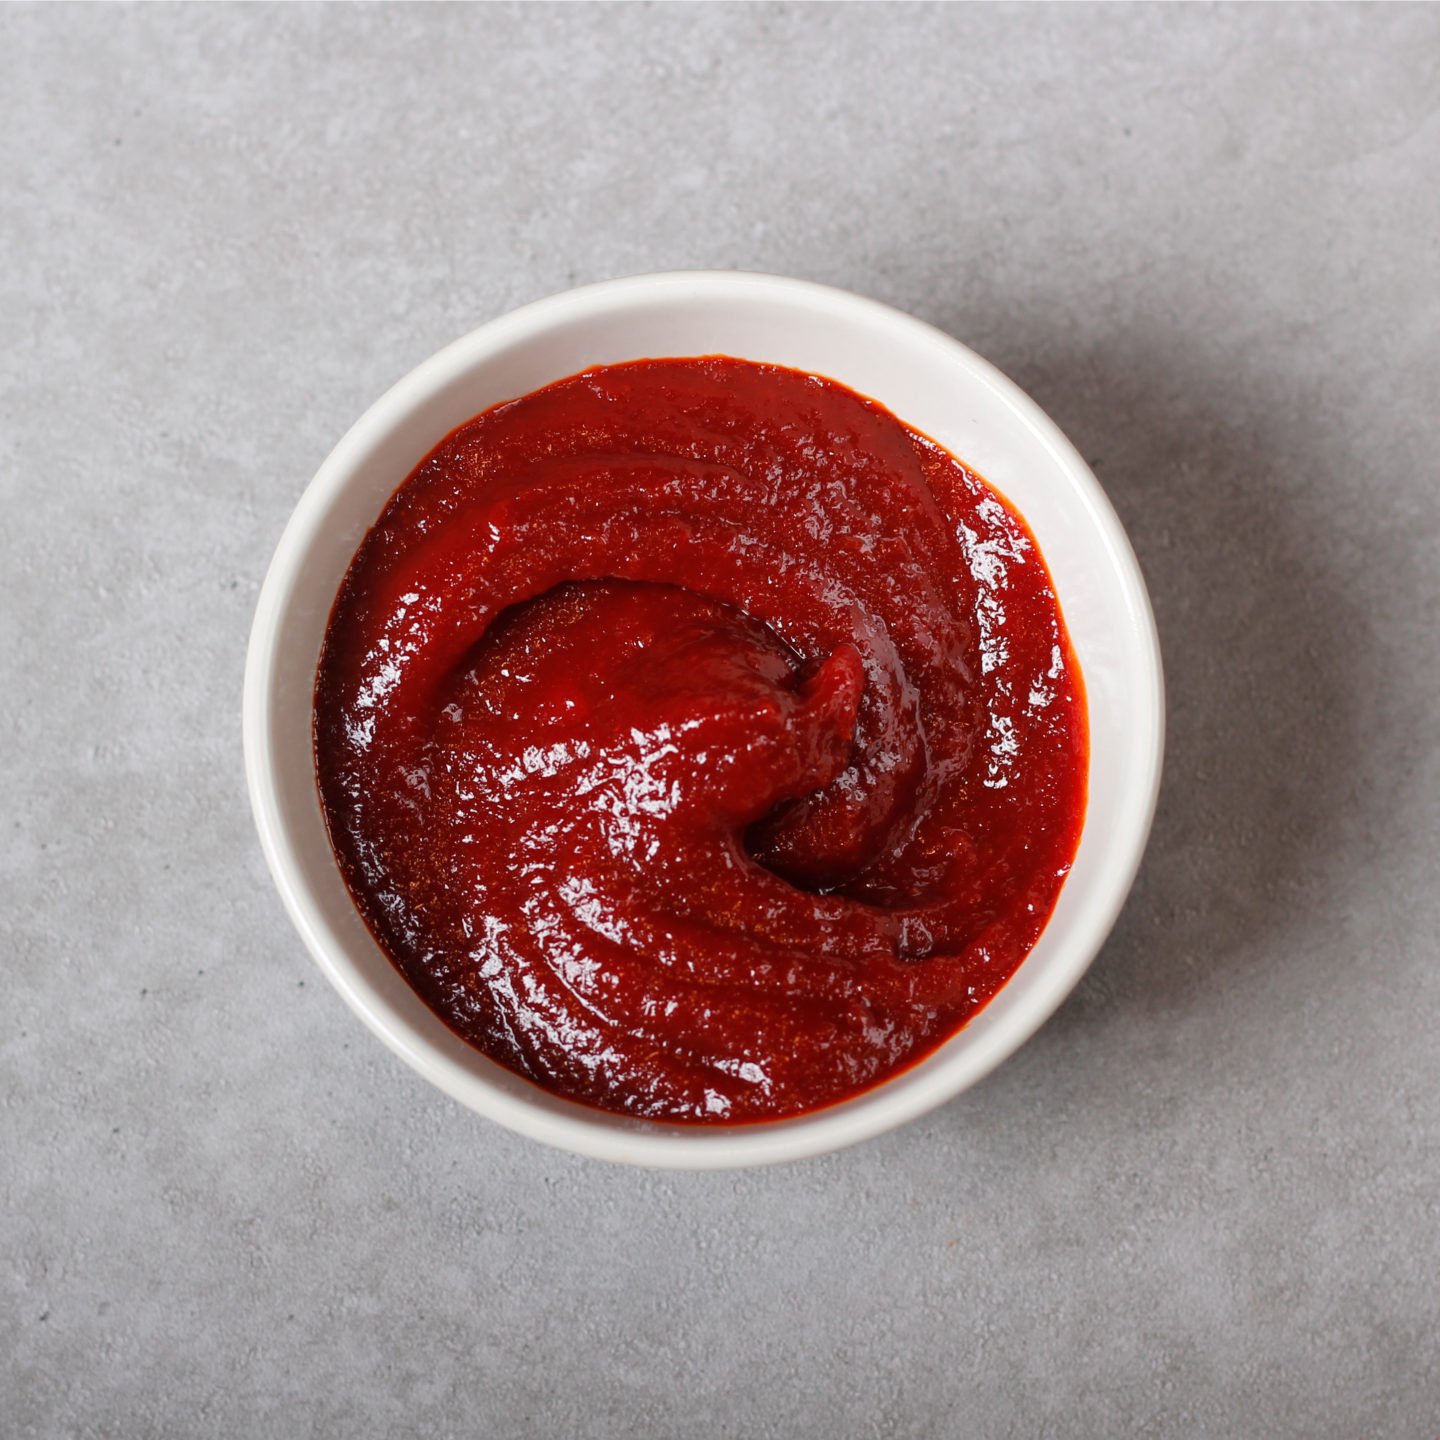 gochujang in a small white bowl